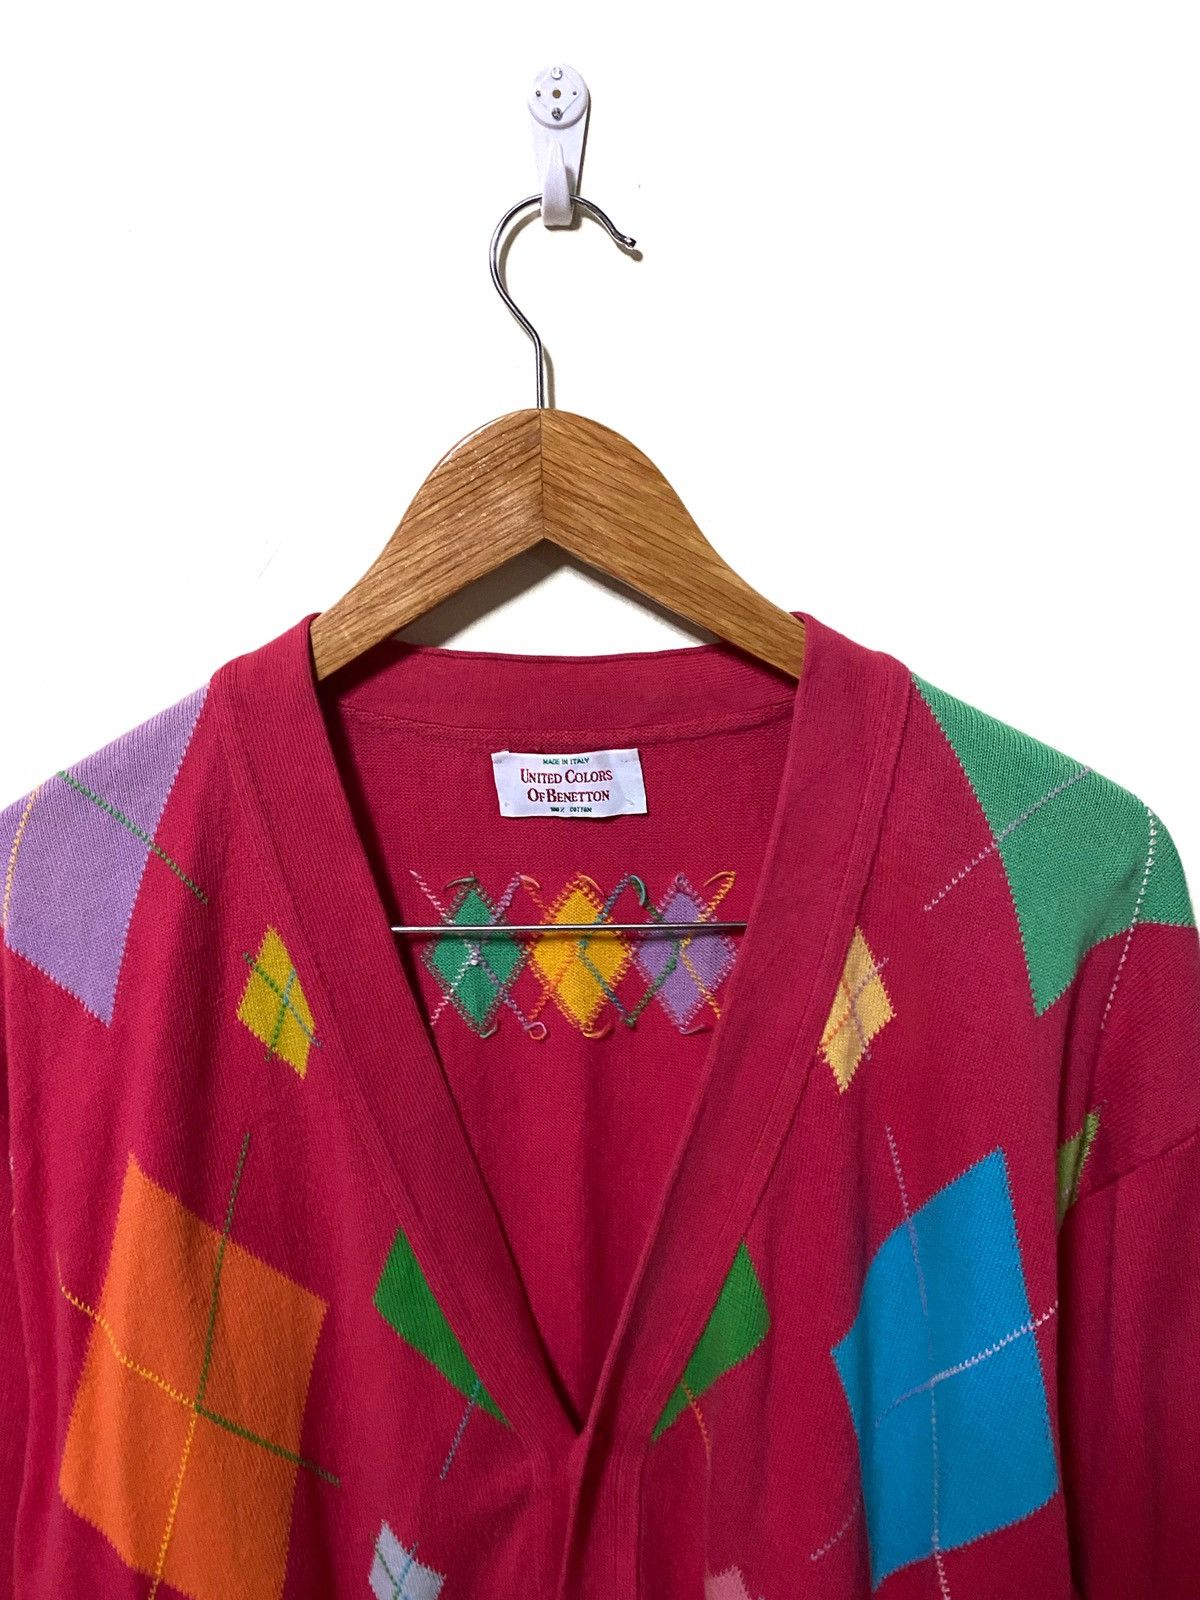 Vintage United Colors of Benetton Multicolor Knit Cardigan - 2